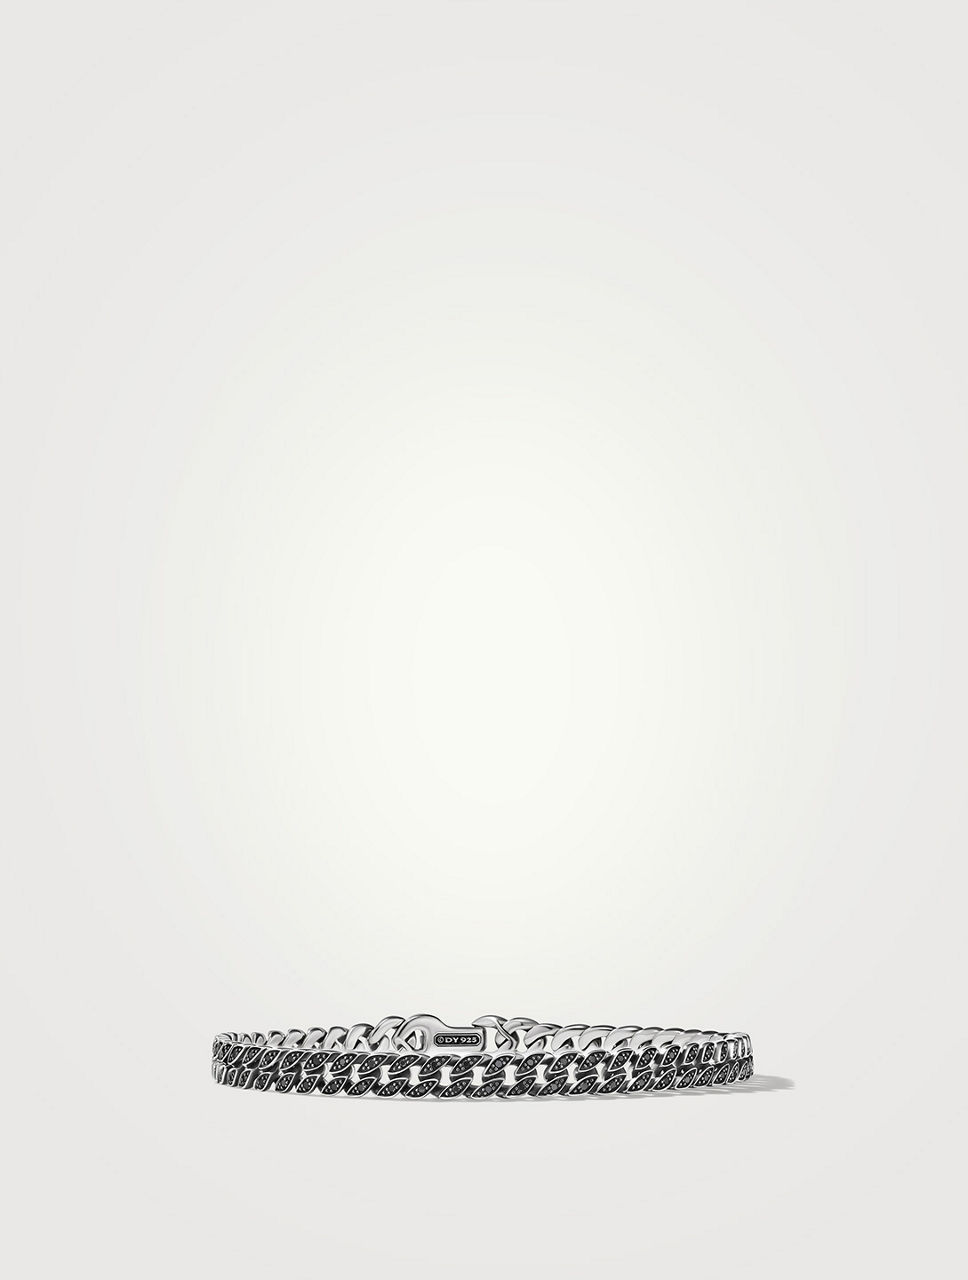 Curb Chain Bracelet Sterling Silver With Black Diamonds, 6mm